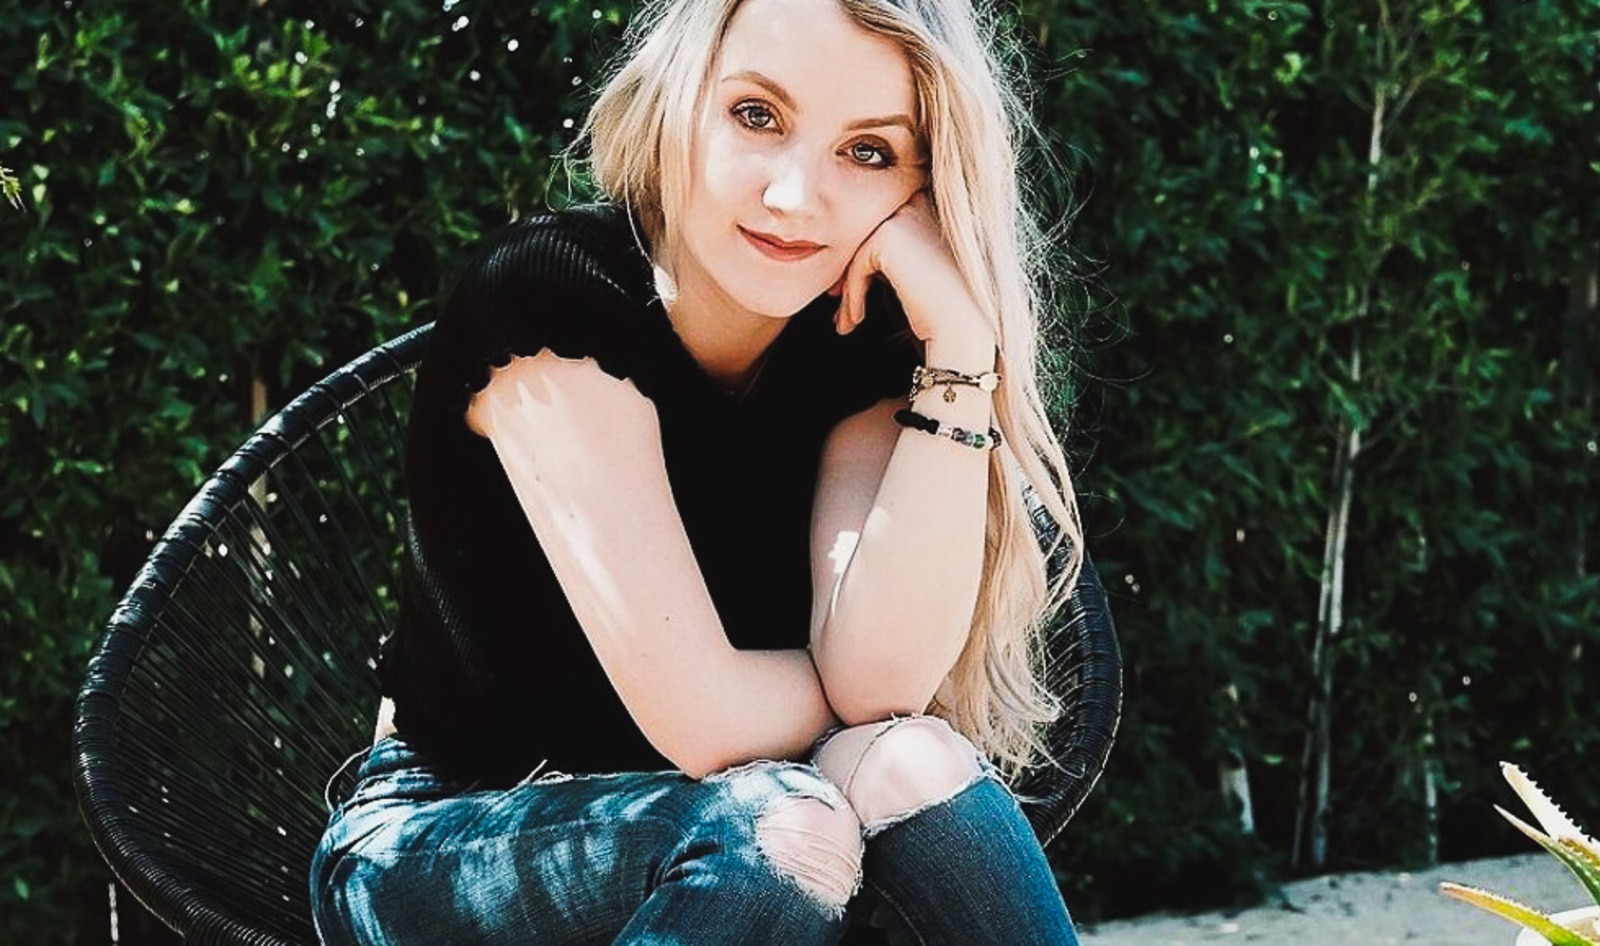 Evanna Lynch Joins Call to Turn Queen's Animal Farm into Sanctuary